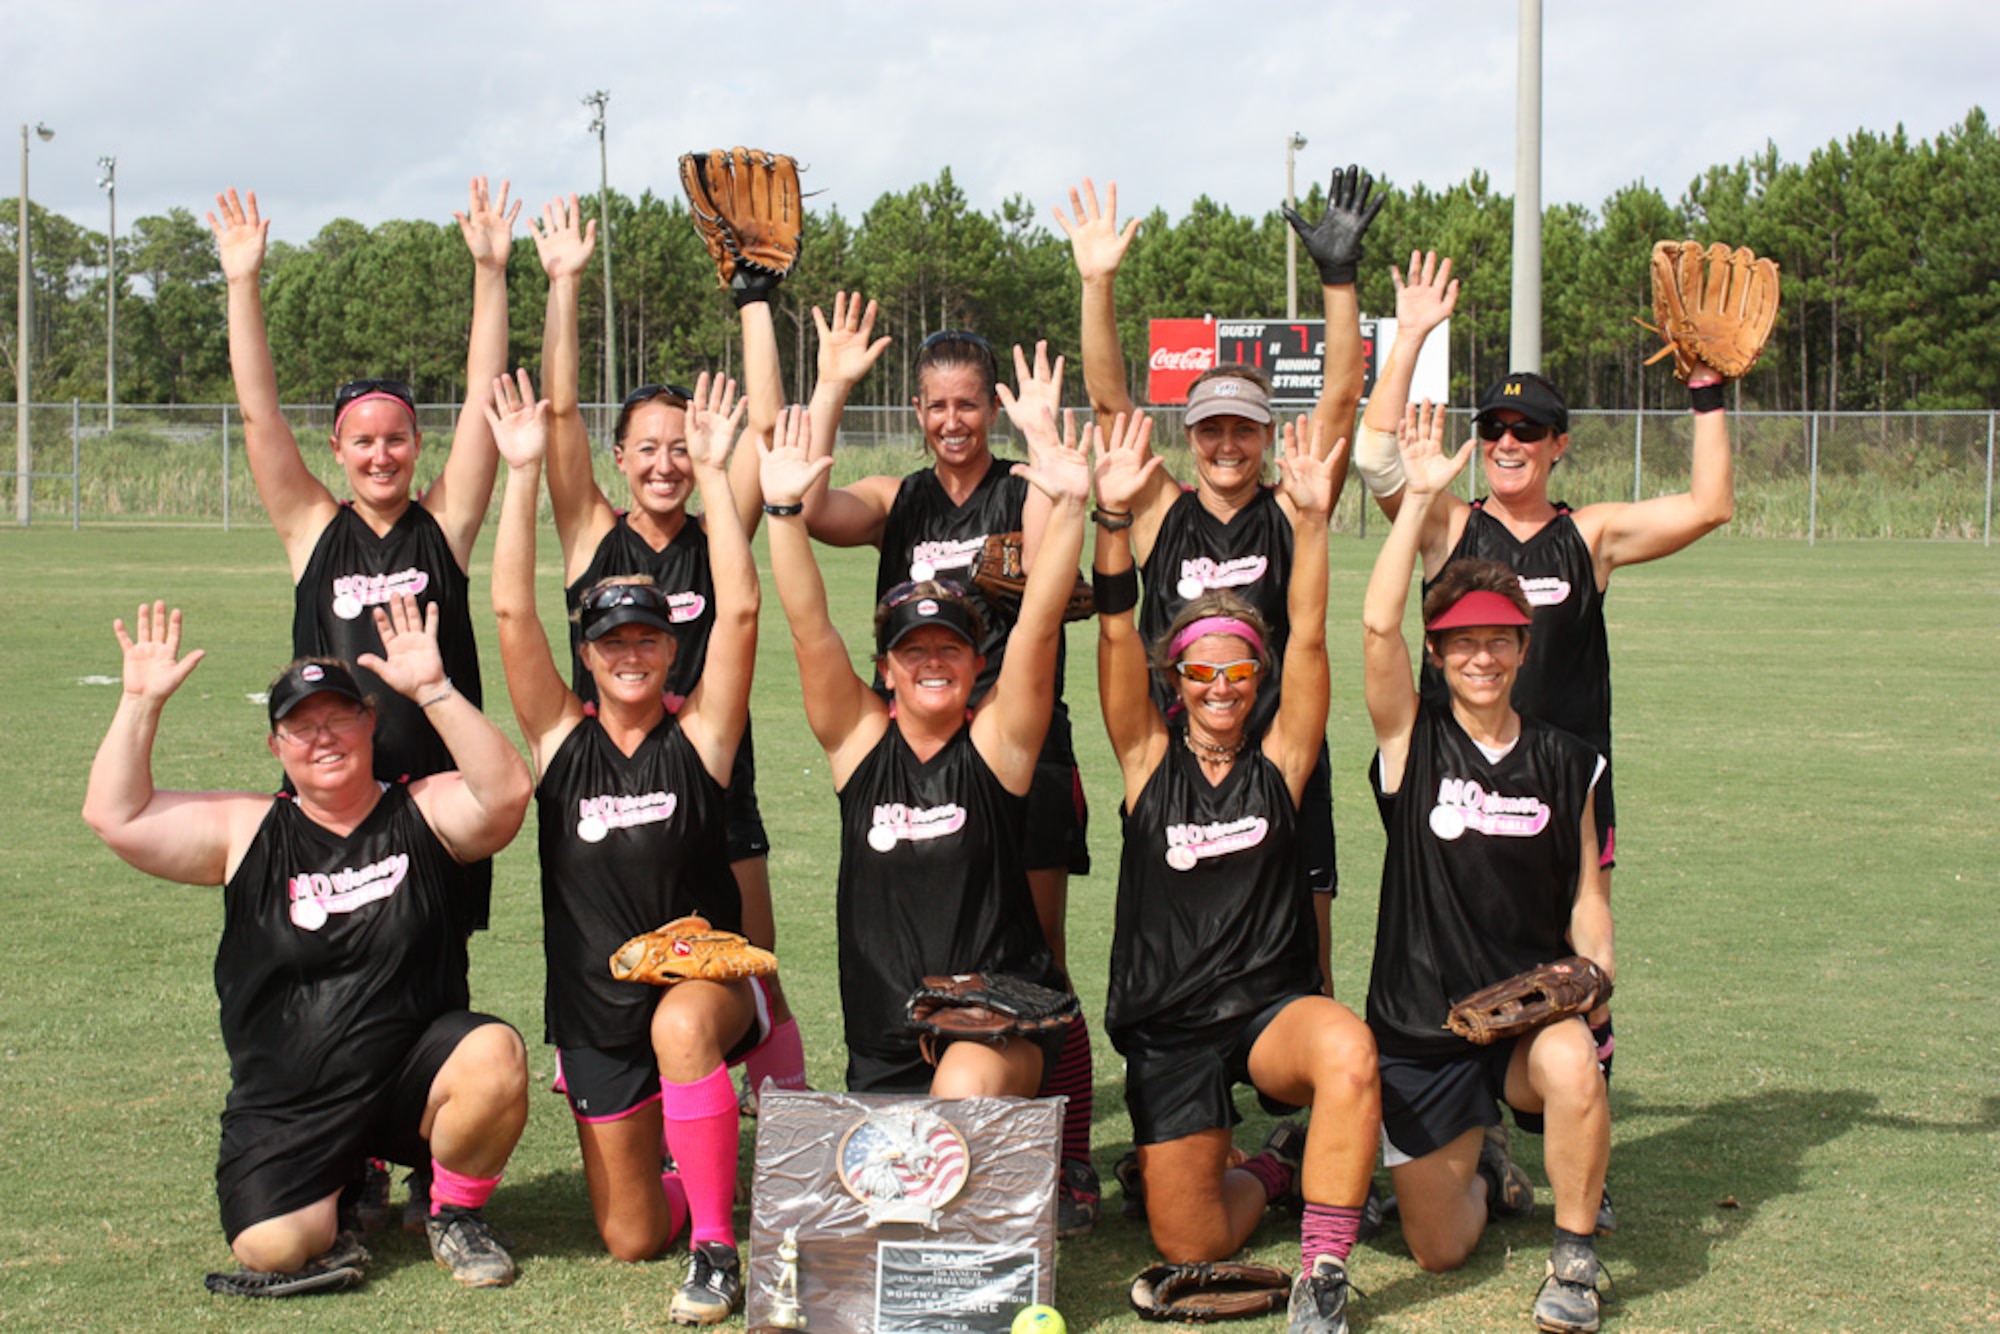 139th Airlift Wing Women's team pose "Hands UP..." with their Championship trophy.  Left to right (back row): Tiffany Beckett, Rachel Malchose, Jaimie Wolf, Marilyn Rongey, Tanya Douglas; (front row): Denise Paden, Lesa Anderson, Heather Mitchell, Jill Johnson, Kim Moore. The 45th annual Air National Guard Softball trournament was held in Panama City, Florida, August 12 - 15, 2010. (U.S. Air Force photo by Lt.Col. Carl Johnson)